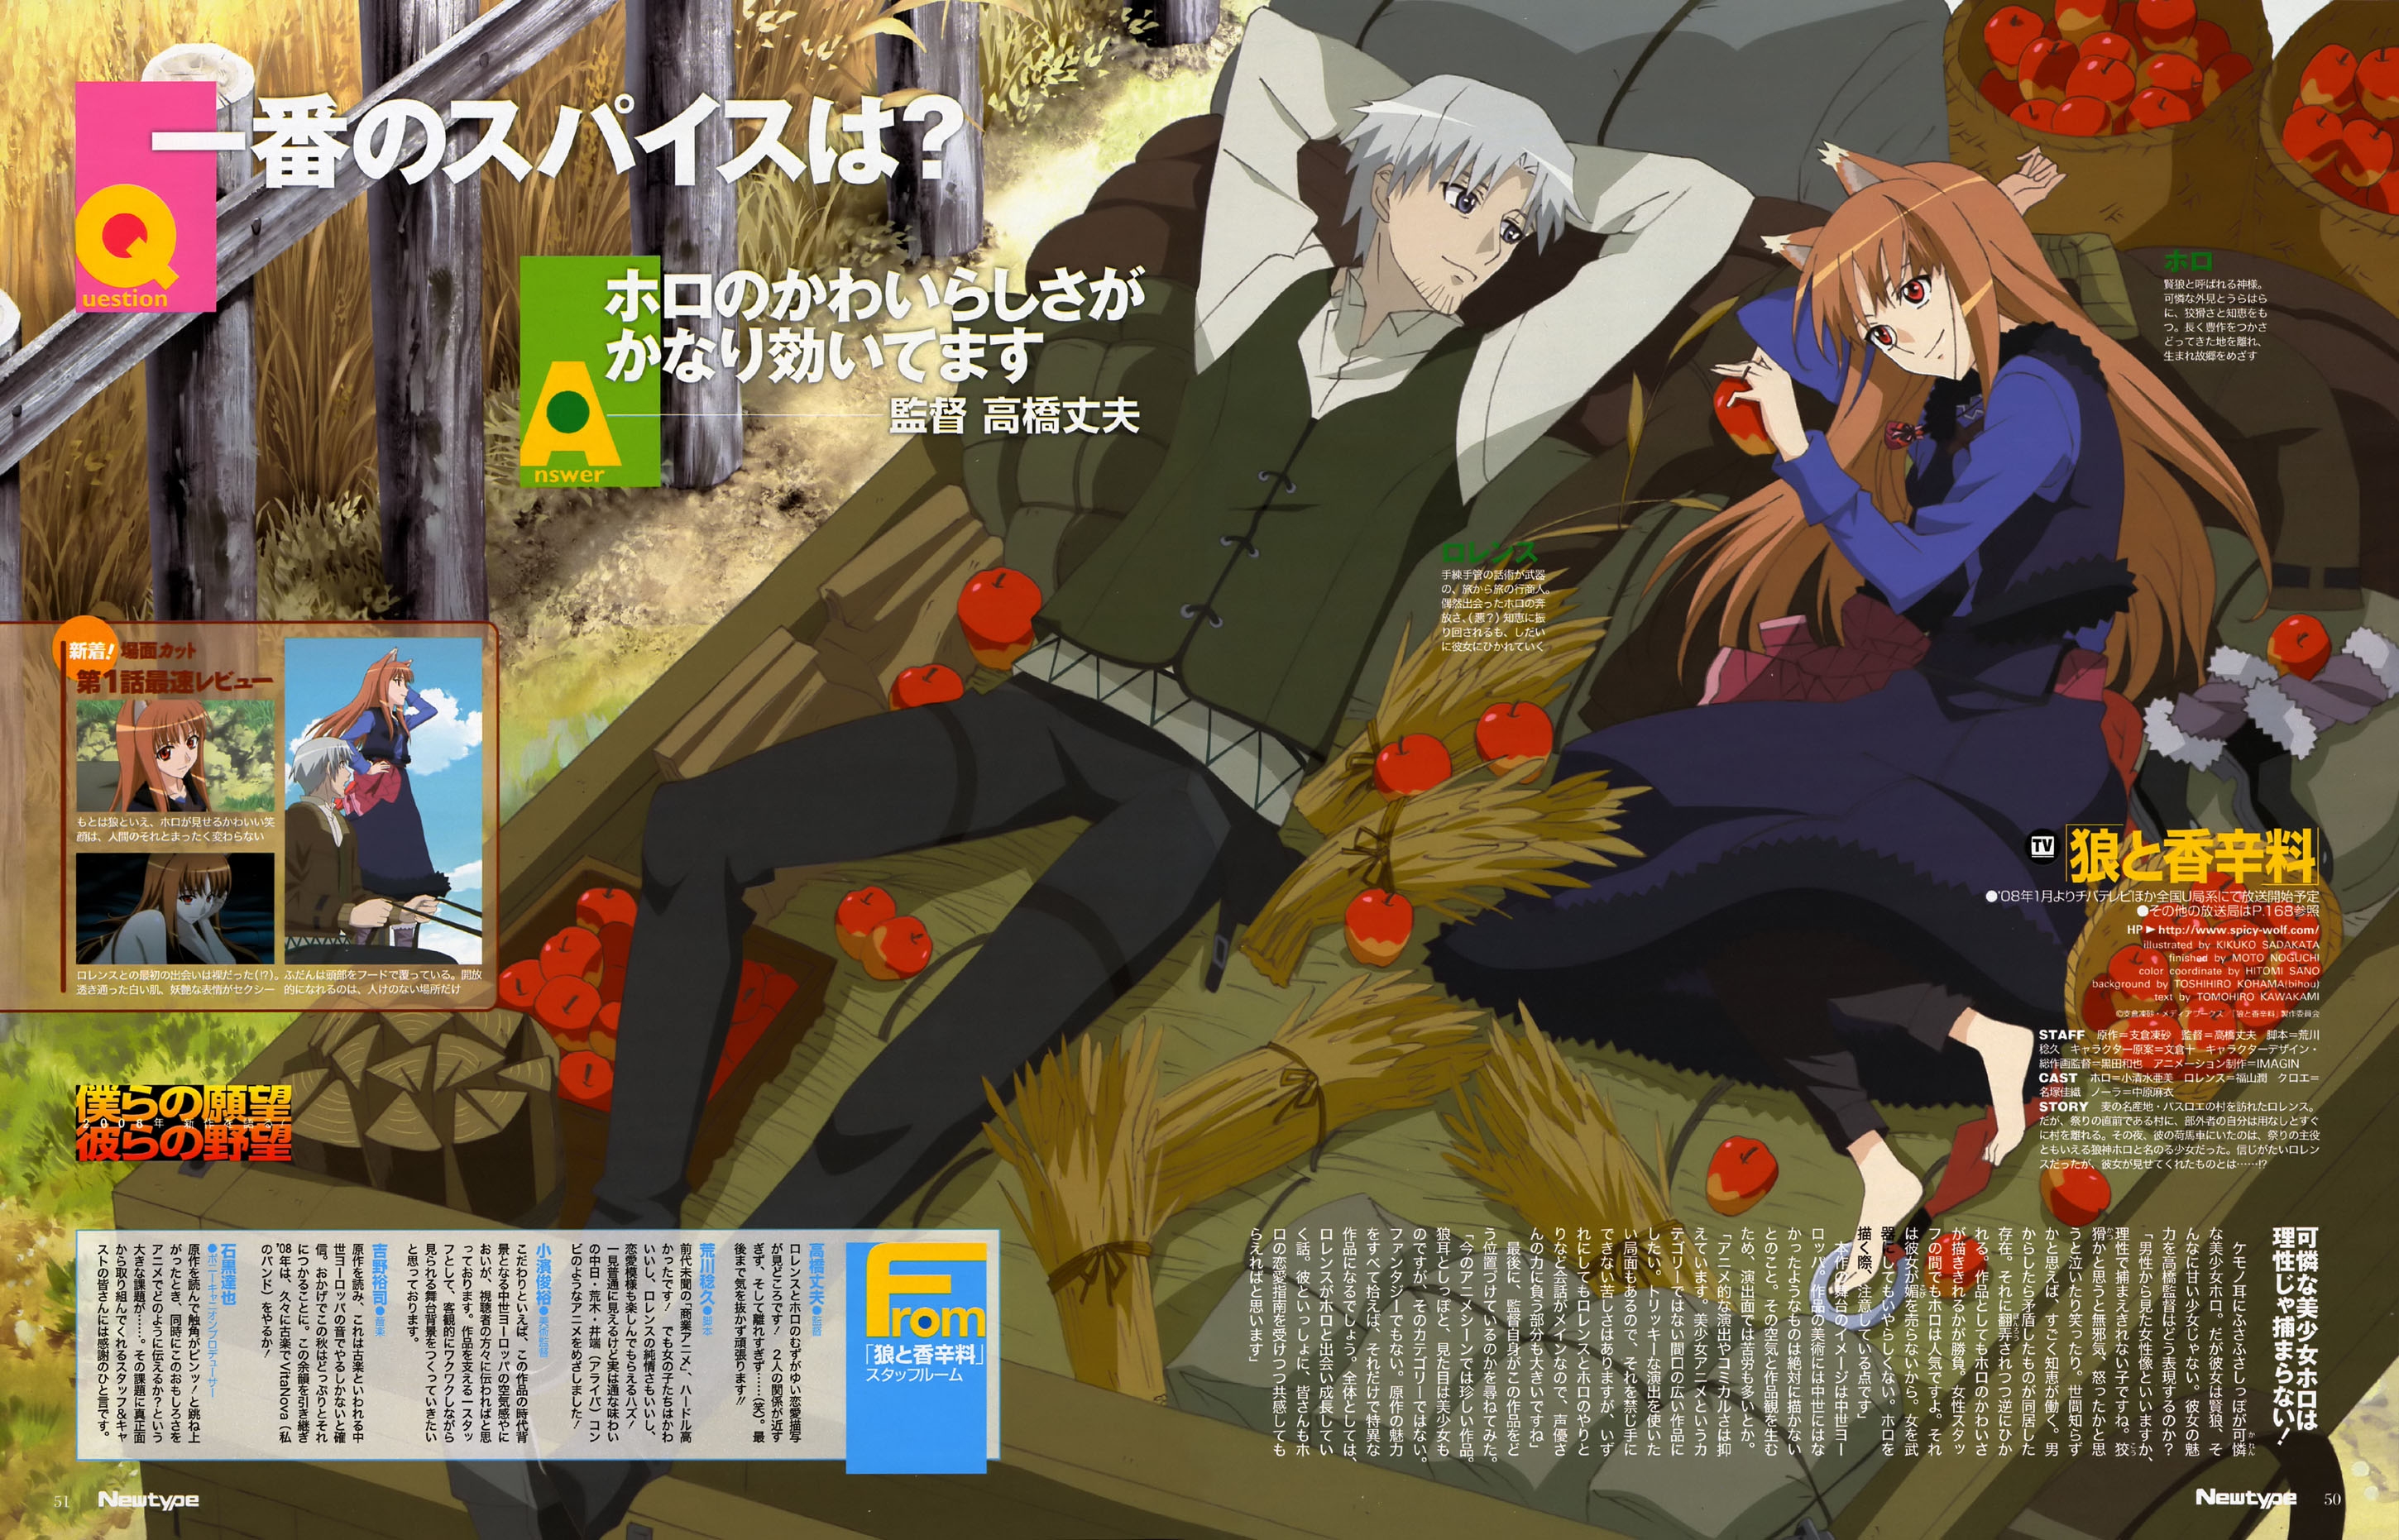 spice_and_wolf47, spice, wolf